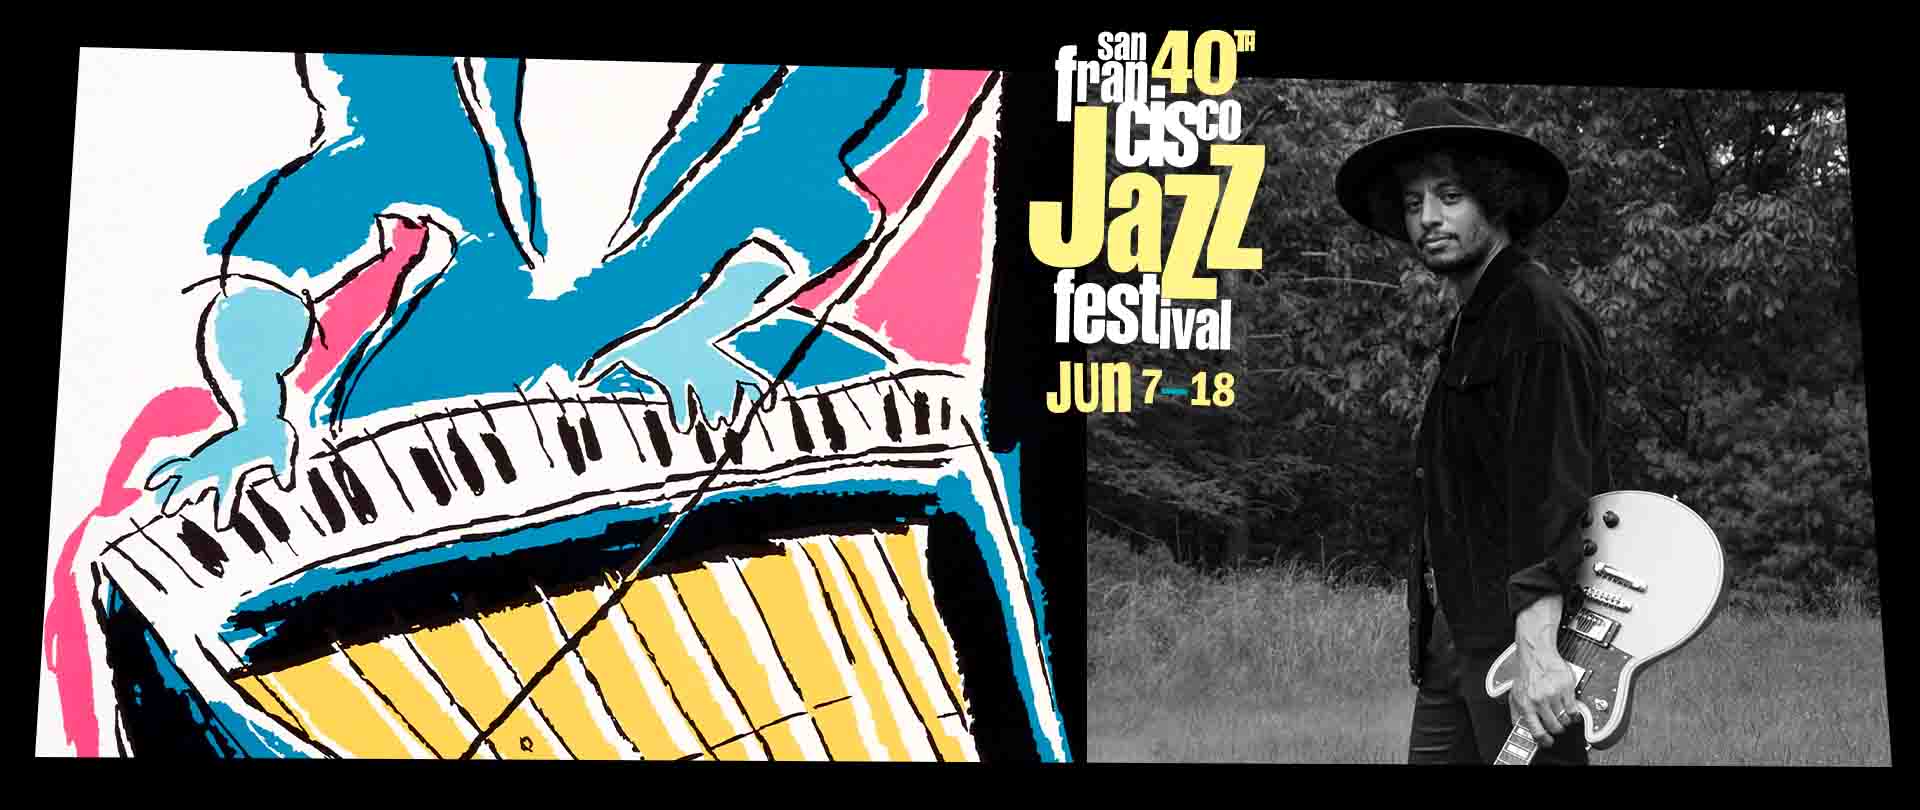 Jose James in nature, with a guitar, along with the 40th San Francisco Jazz Festival artwork